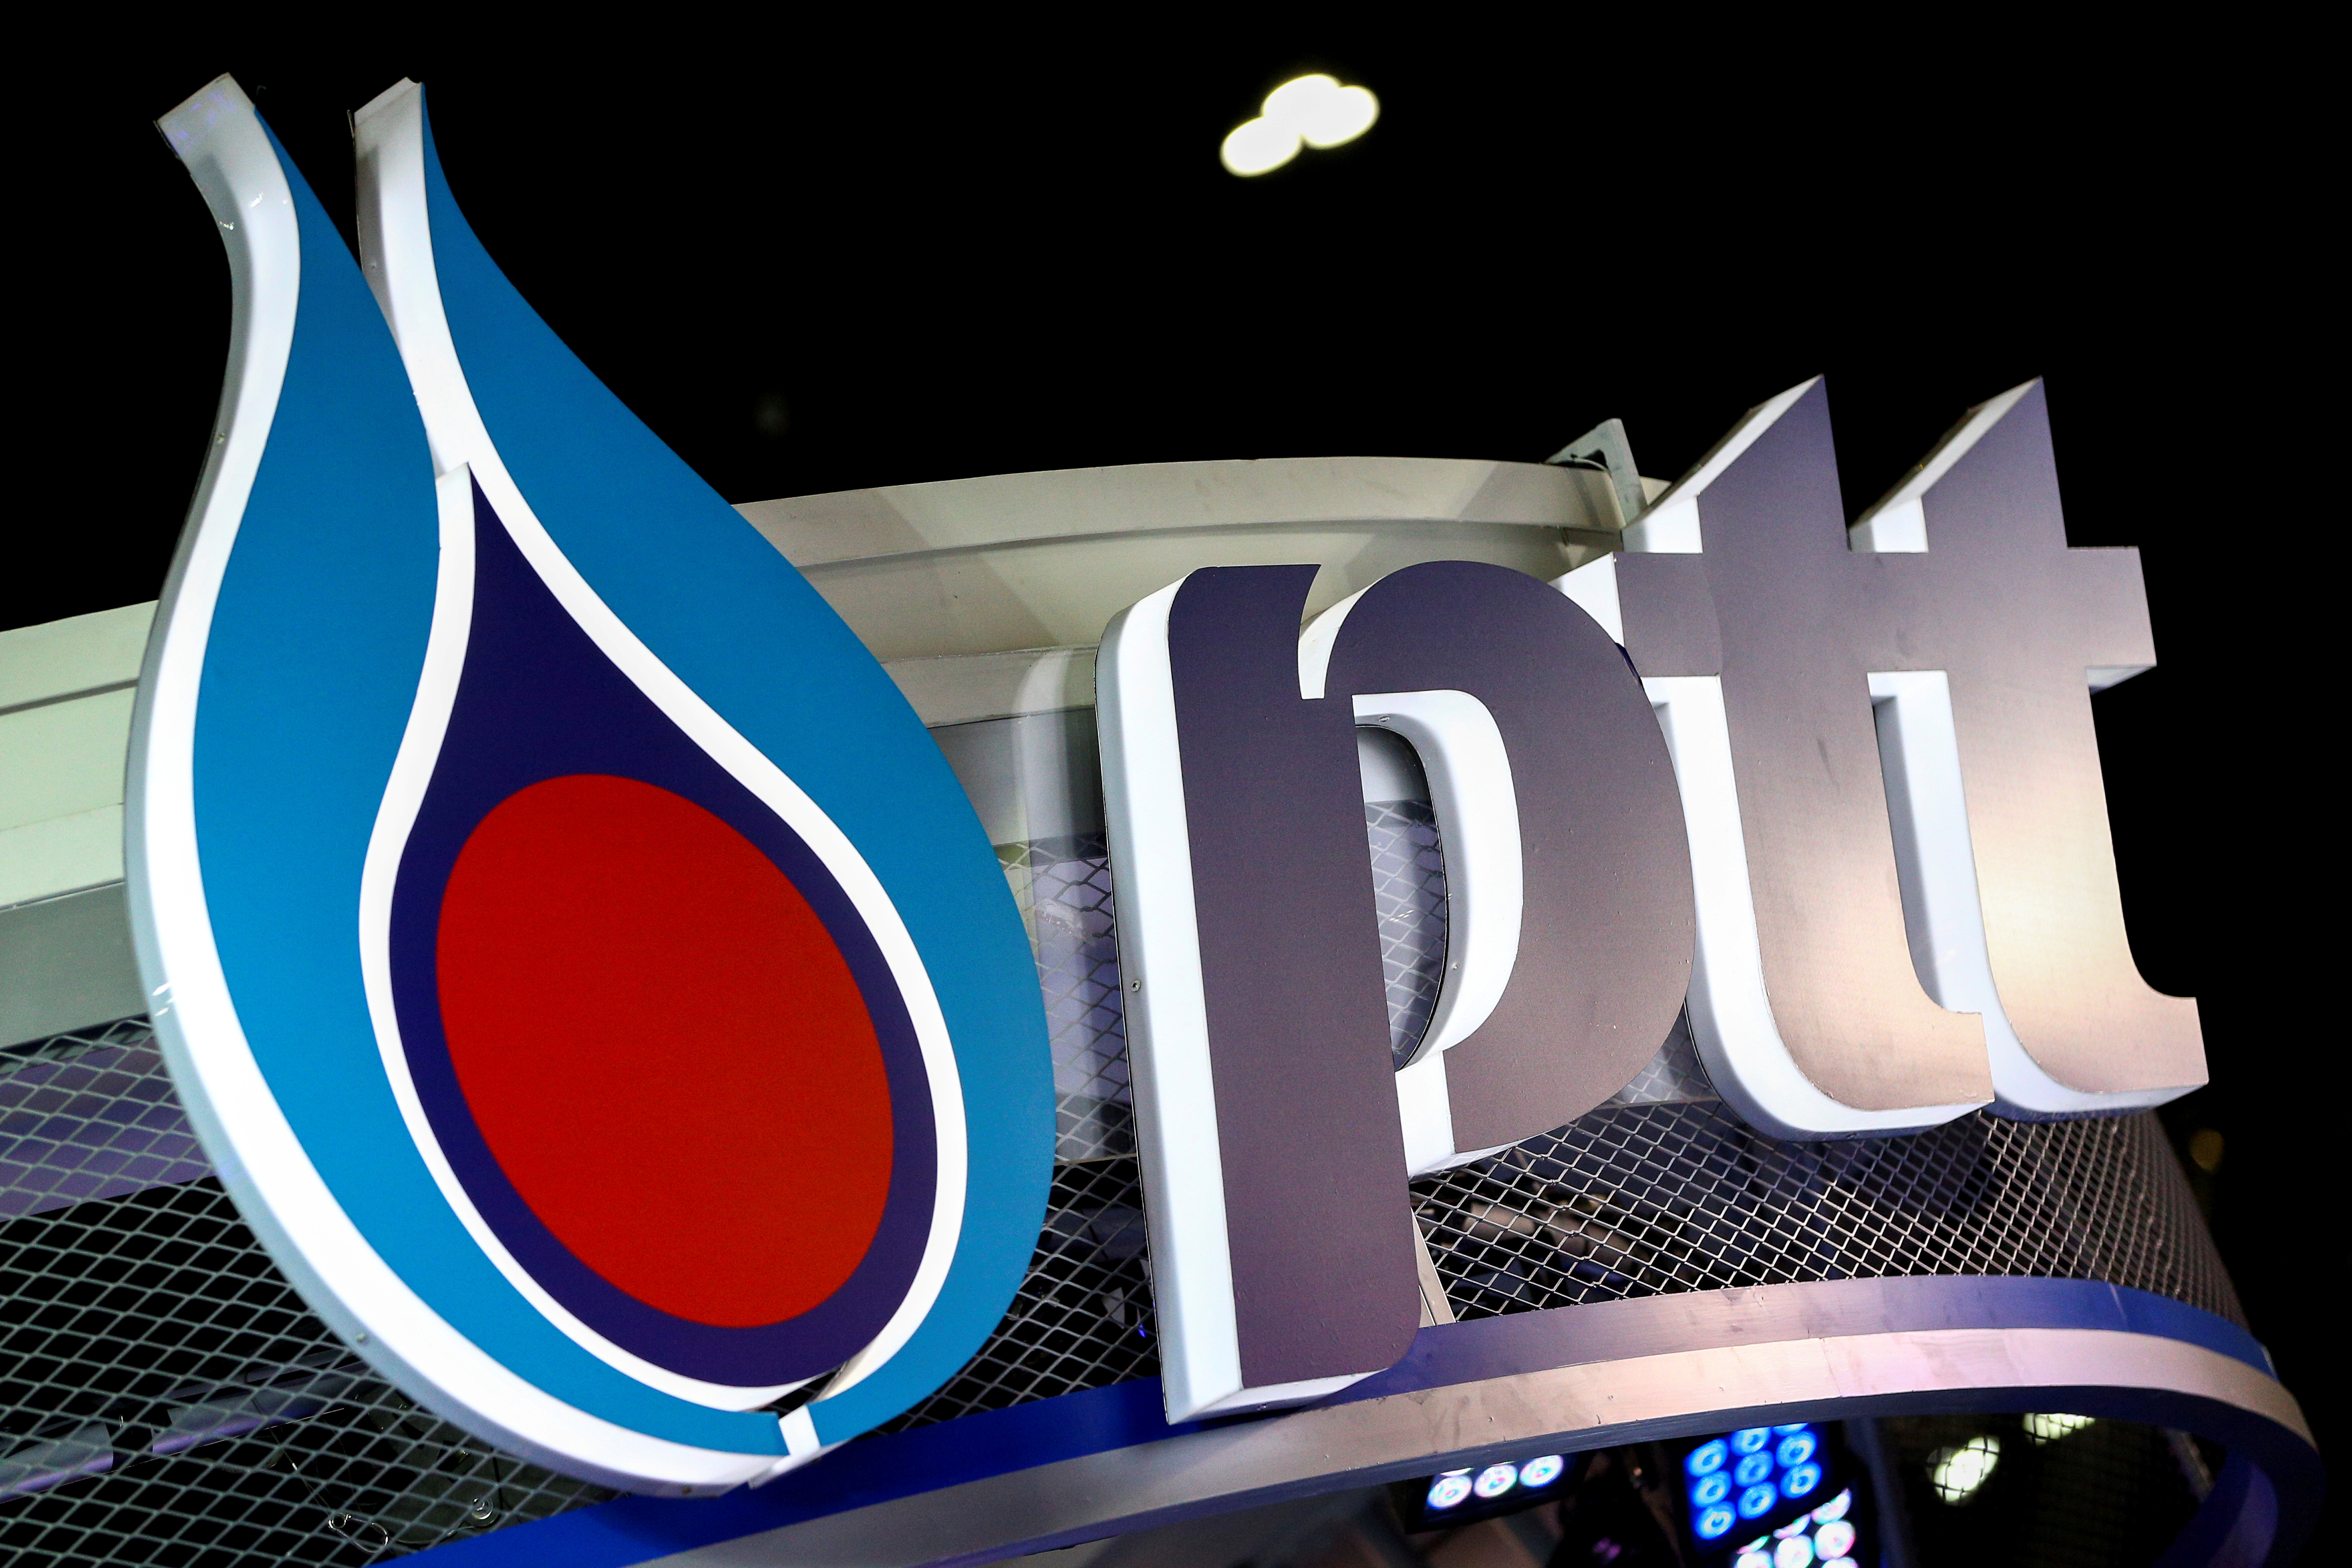 The logo of PTT is pictured at the 38th Bangkok International Motor Show in Bangkok